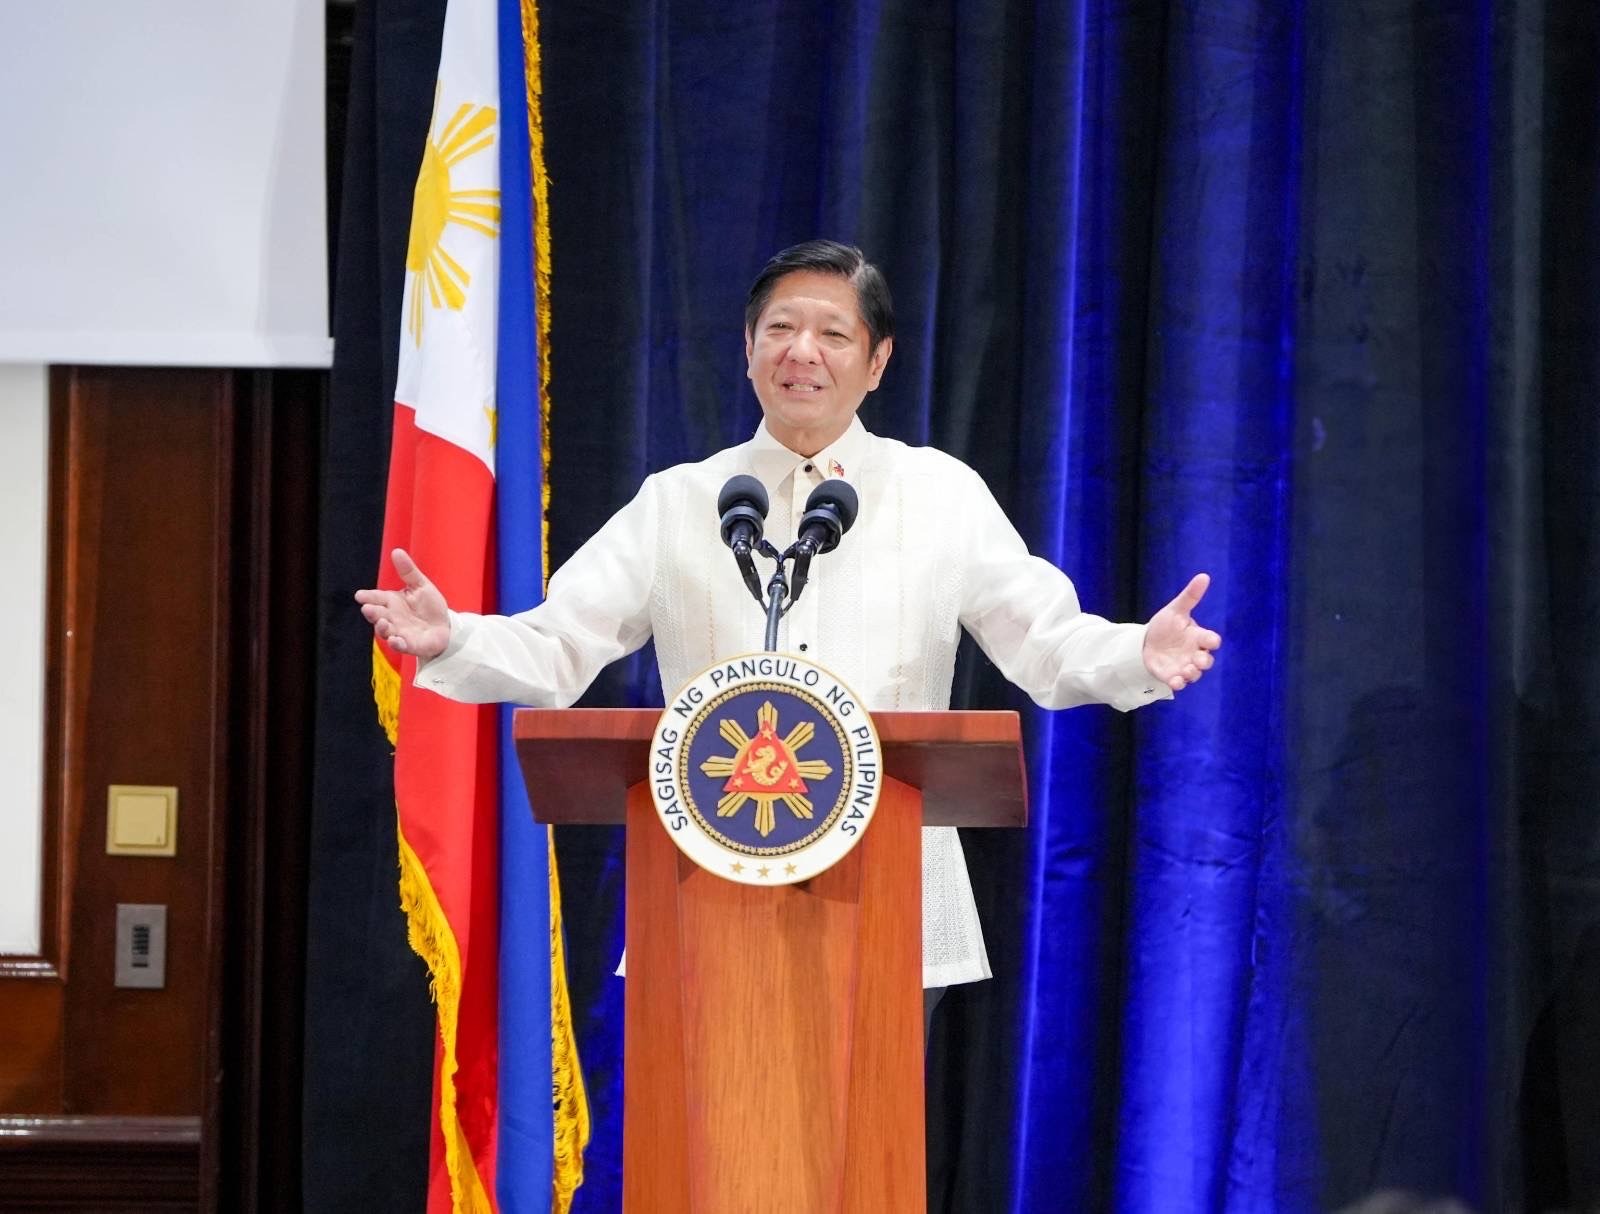 President Ferdinand Marcos Jr. said the government will expand its partnership with the World Food Programme (WFP).